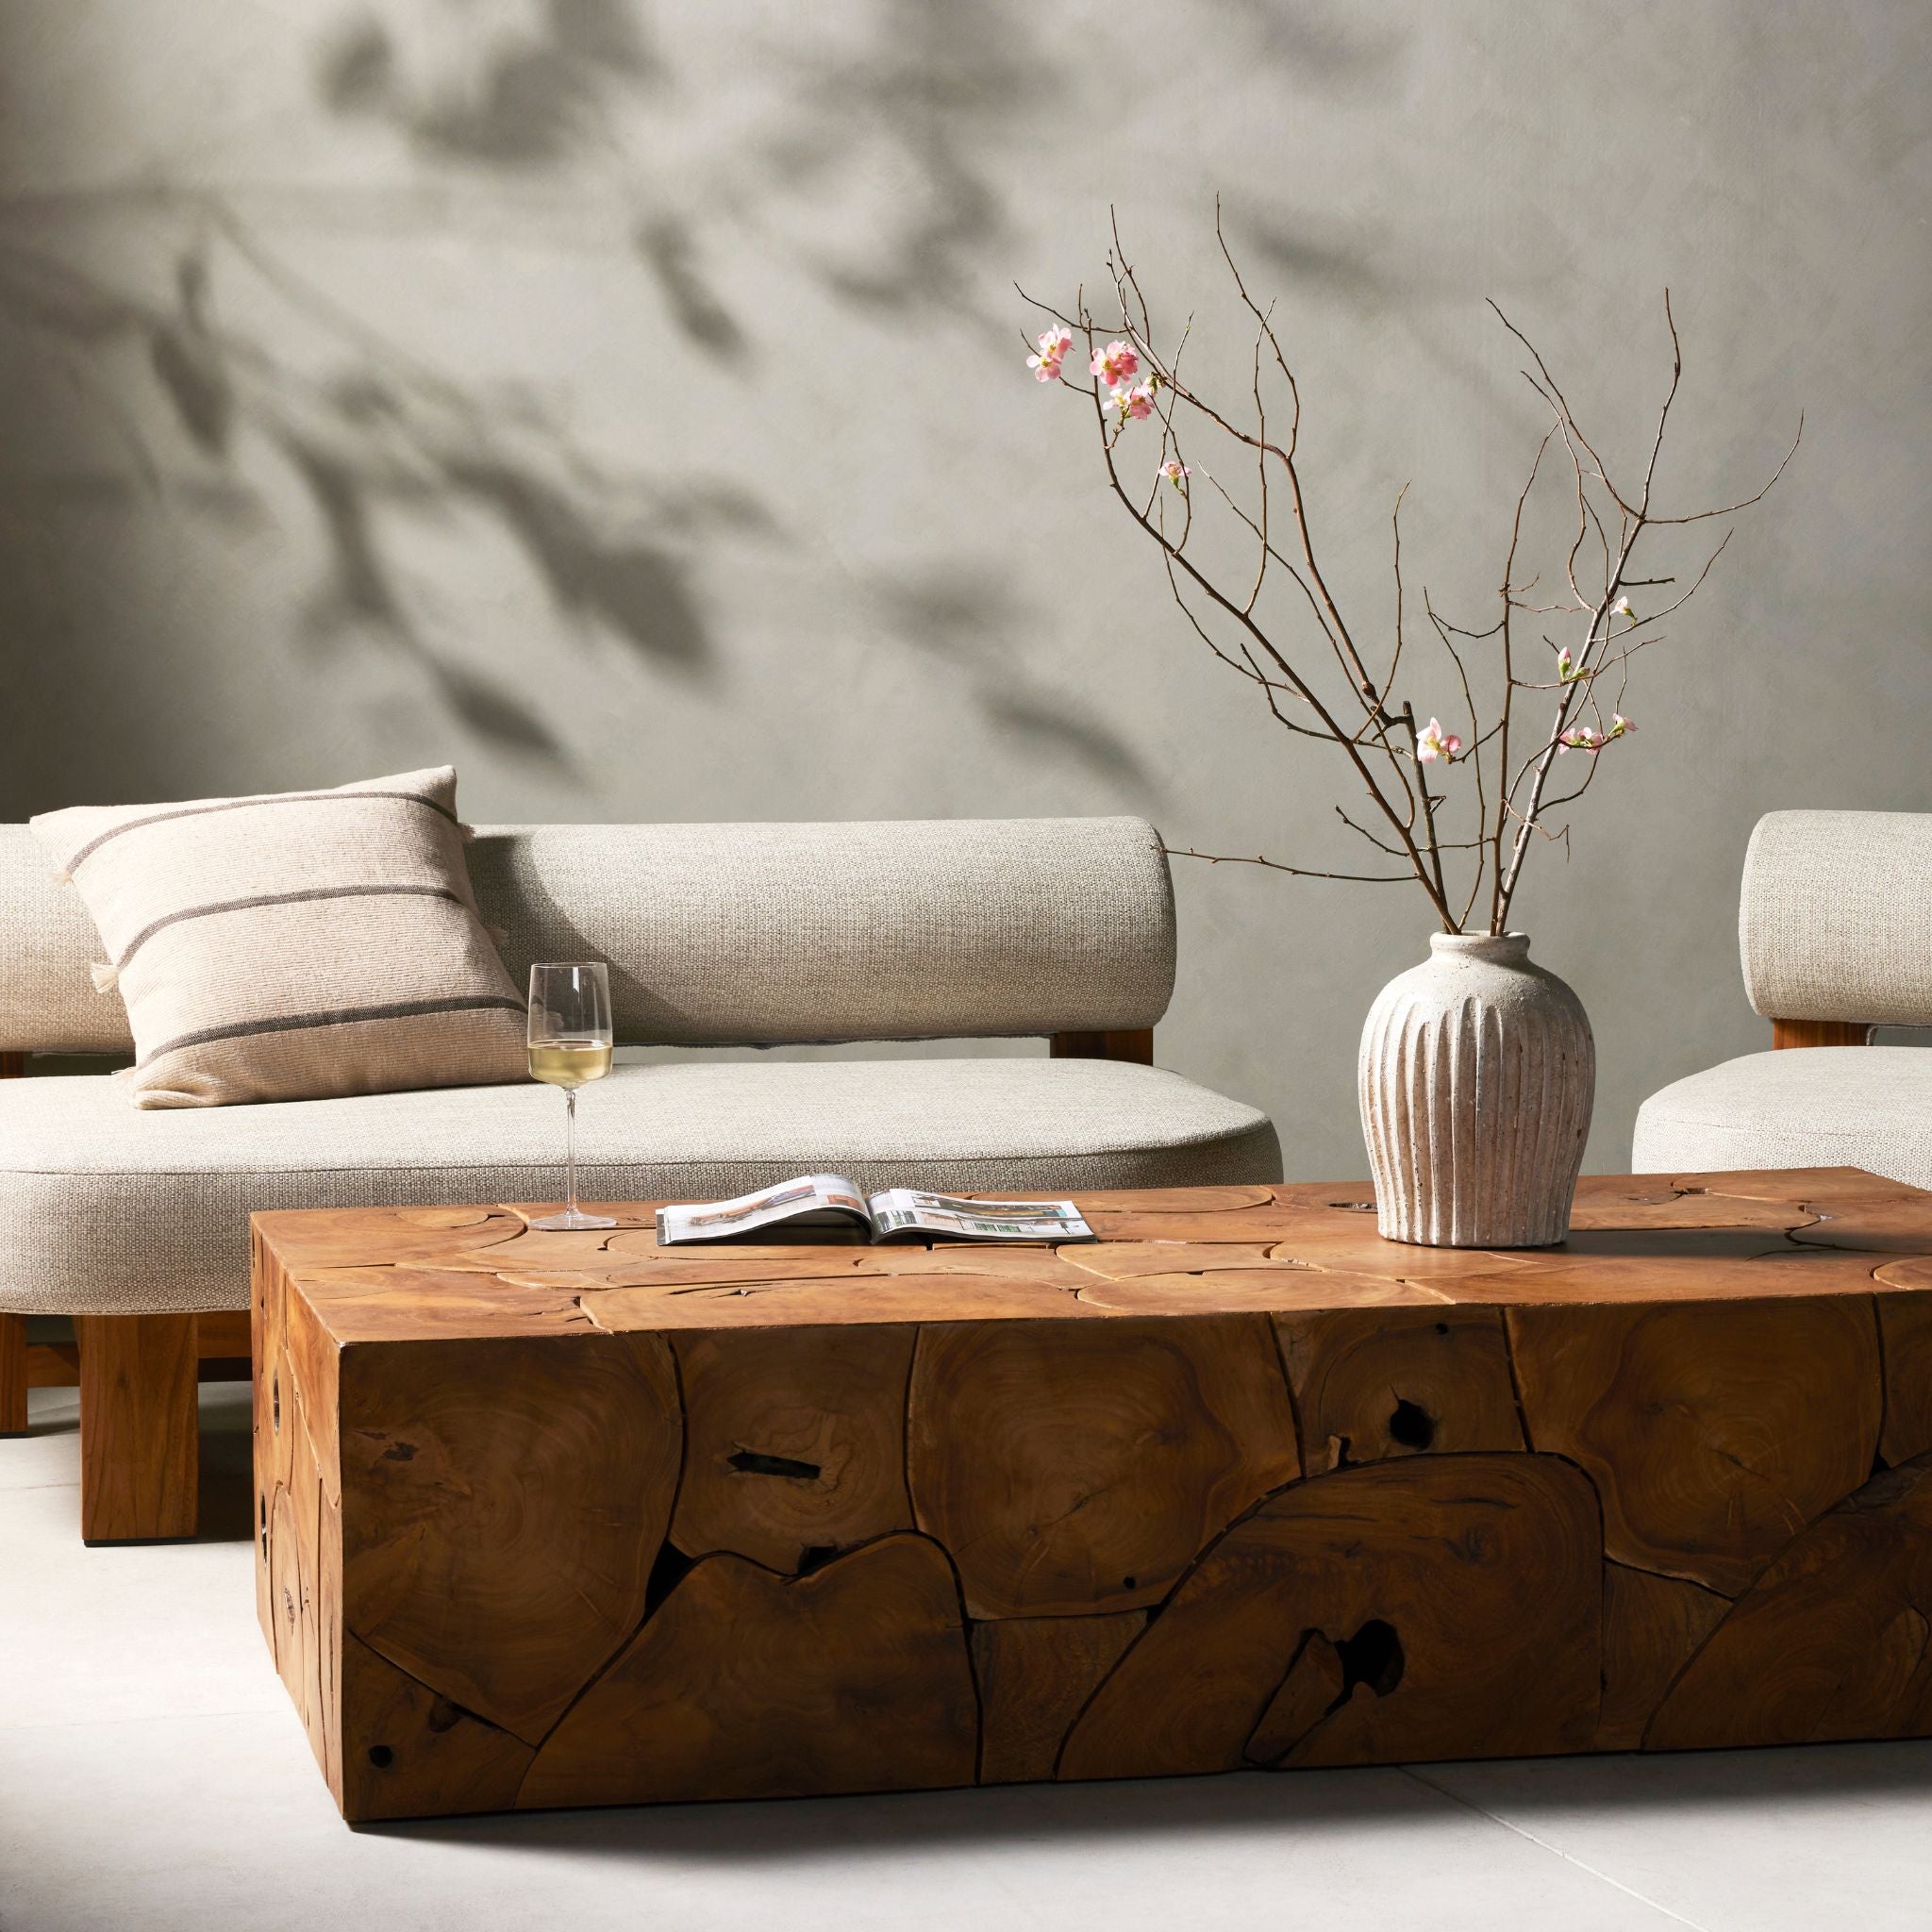 Simply Elevated - A unique layering piece — indoors or out. Made from laminated teak root with miter joinery, a simply shaped coffee table offers organic vibes and plenty of natural movement. Tables will vary from piece to piece, reflective of natural materials. Joint expansion may grow visible over time.